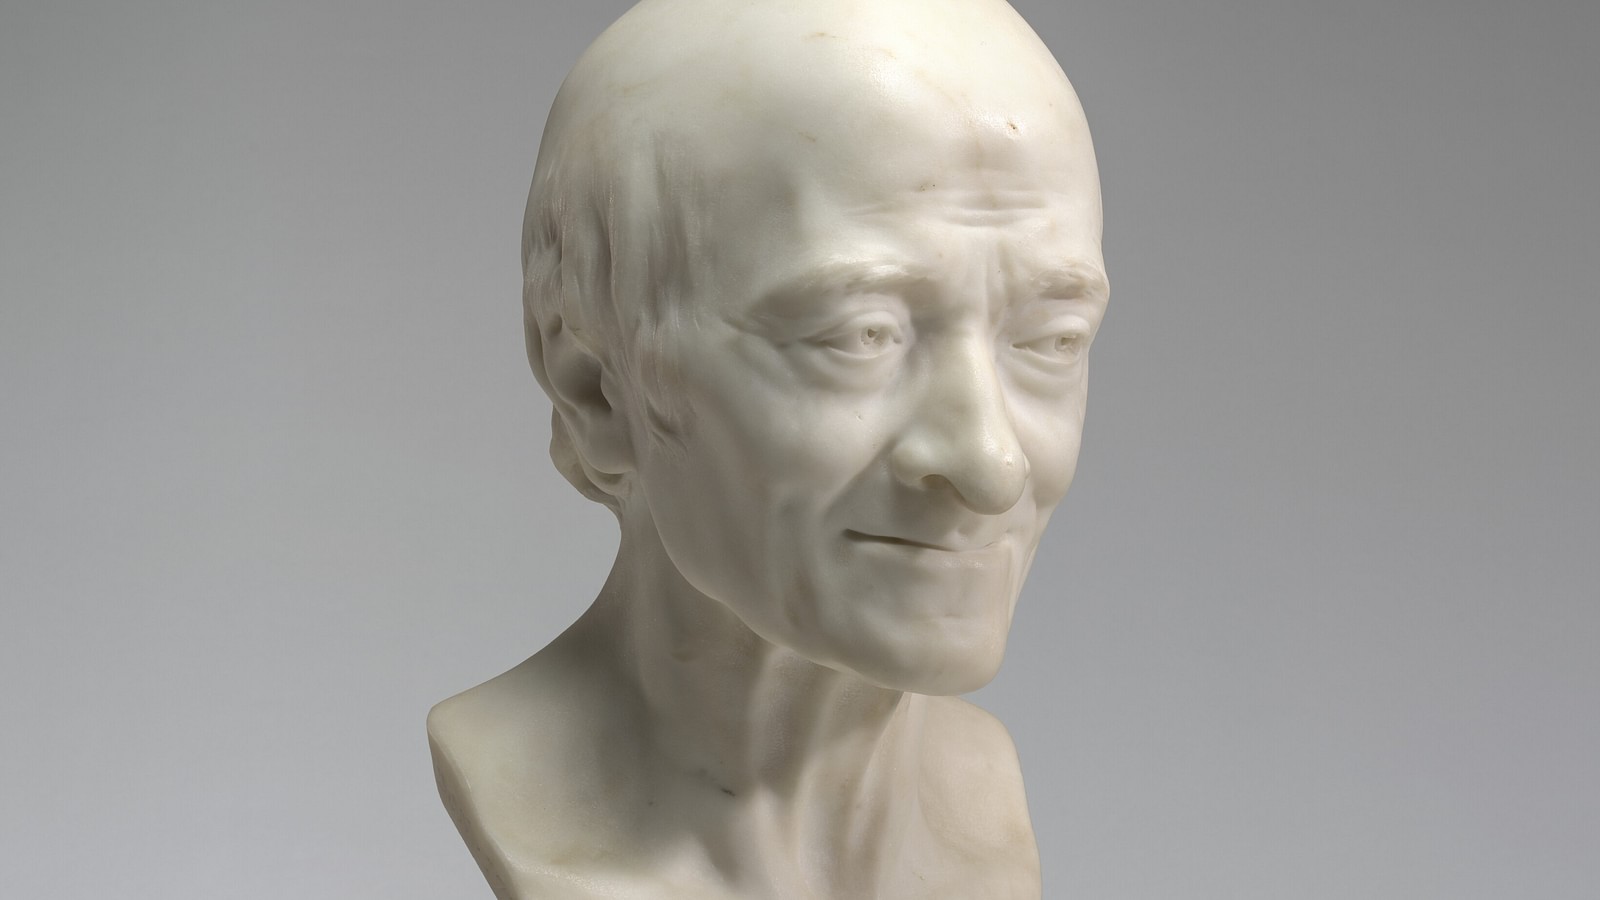 Bust of Voltaire (Illustration) - World History Encyclopedia